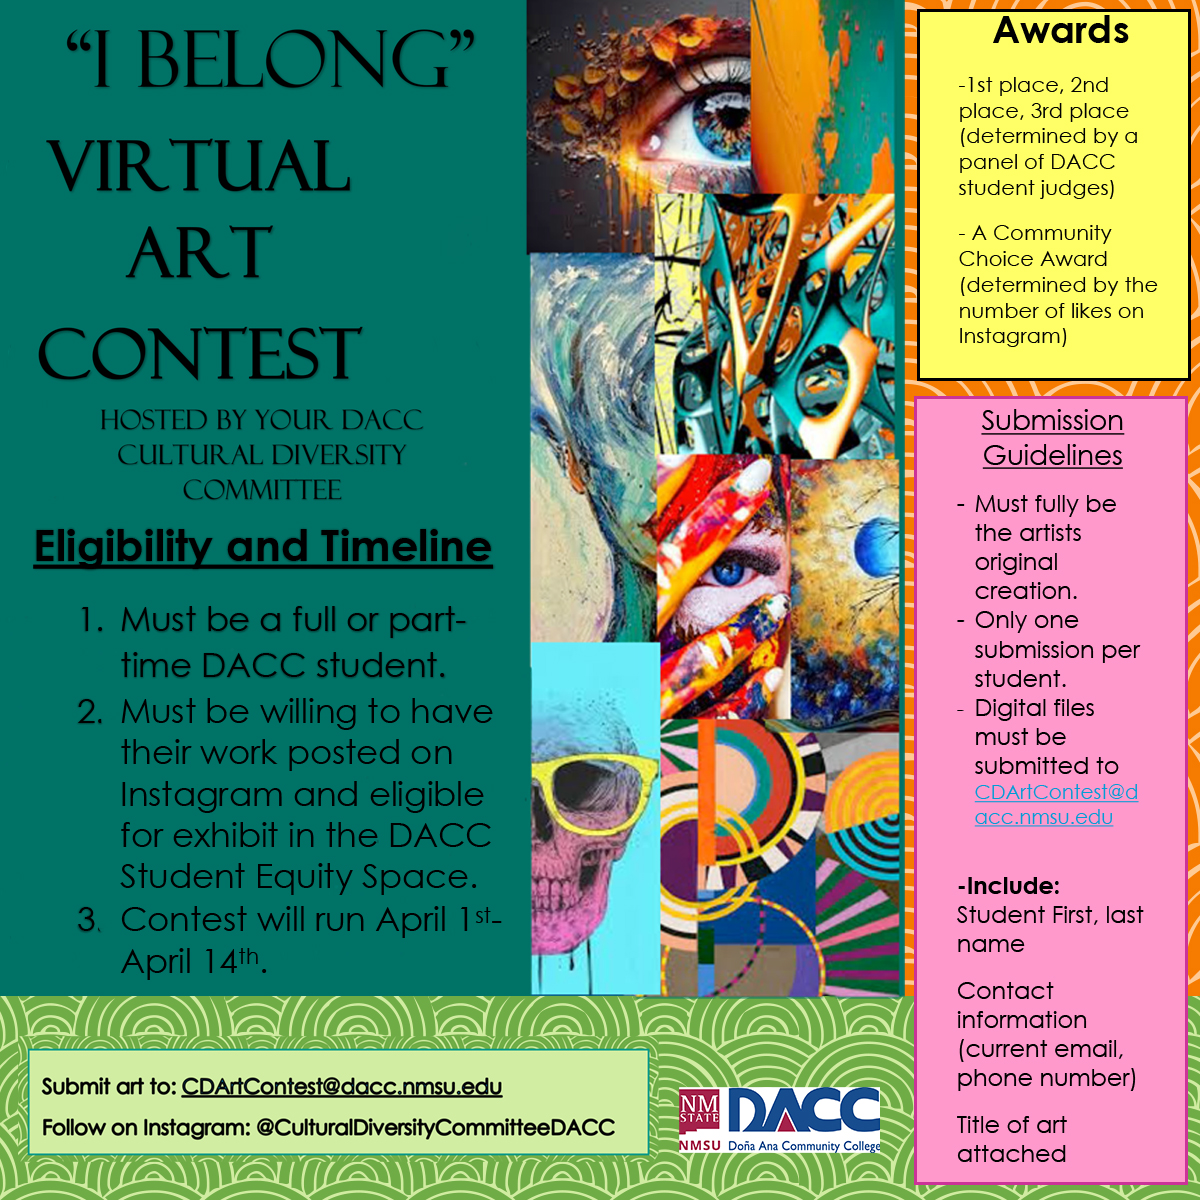 DACC 'I Belong' Virtual Art Contest. Get creative and submit your digital file to CDArtContest@dacc.nmsu.edu. Must be a full or part-time DACC student to participate. Contest runs from April 1-14. Include your full name, title of art attached and contact info. #WeAreDACC